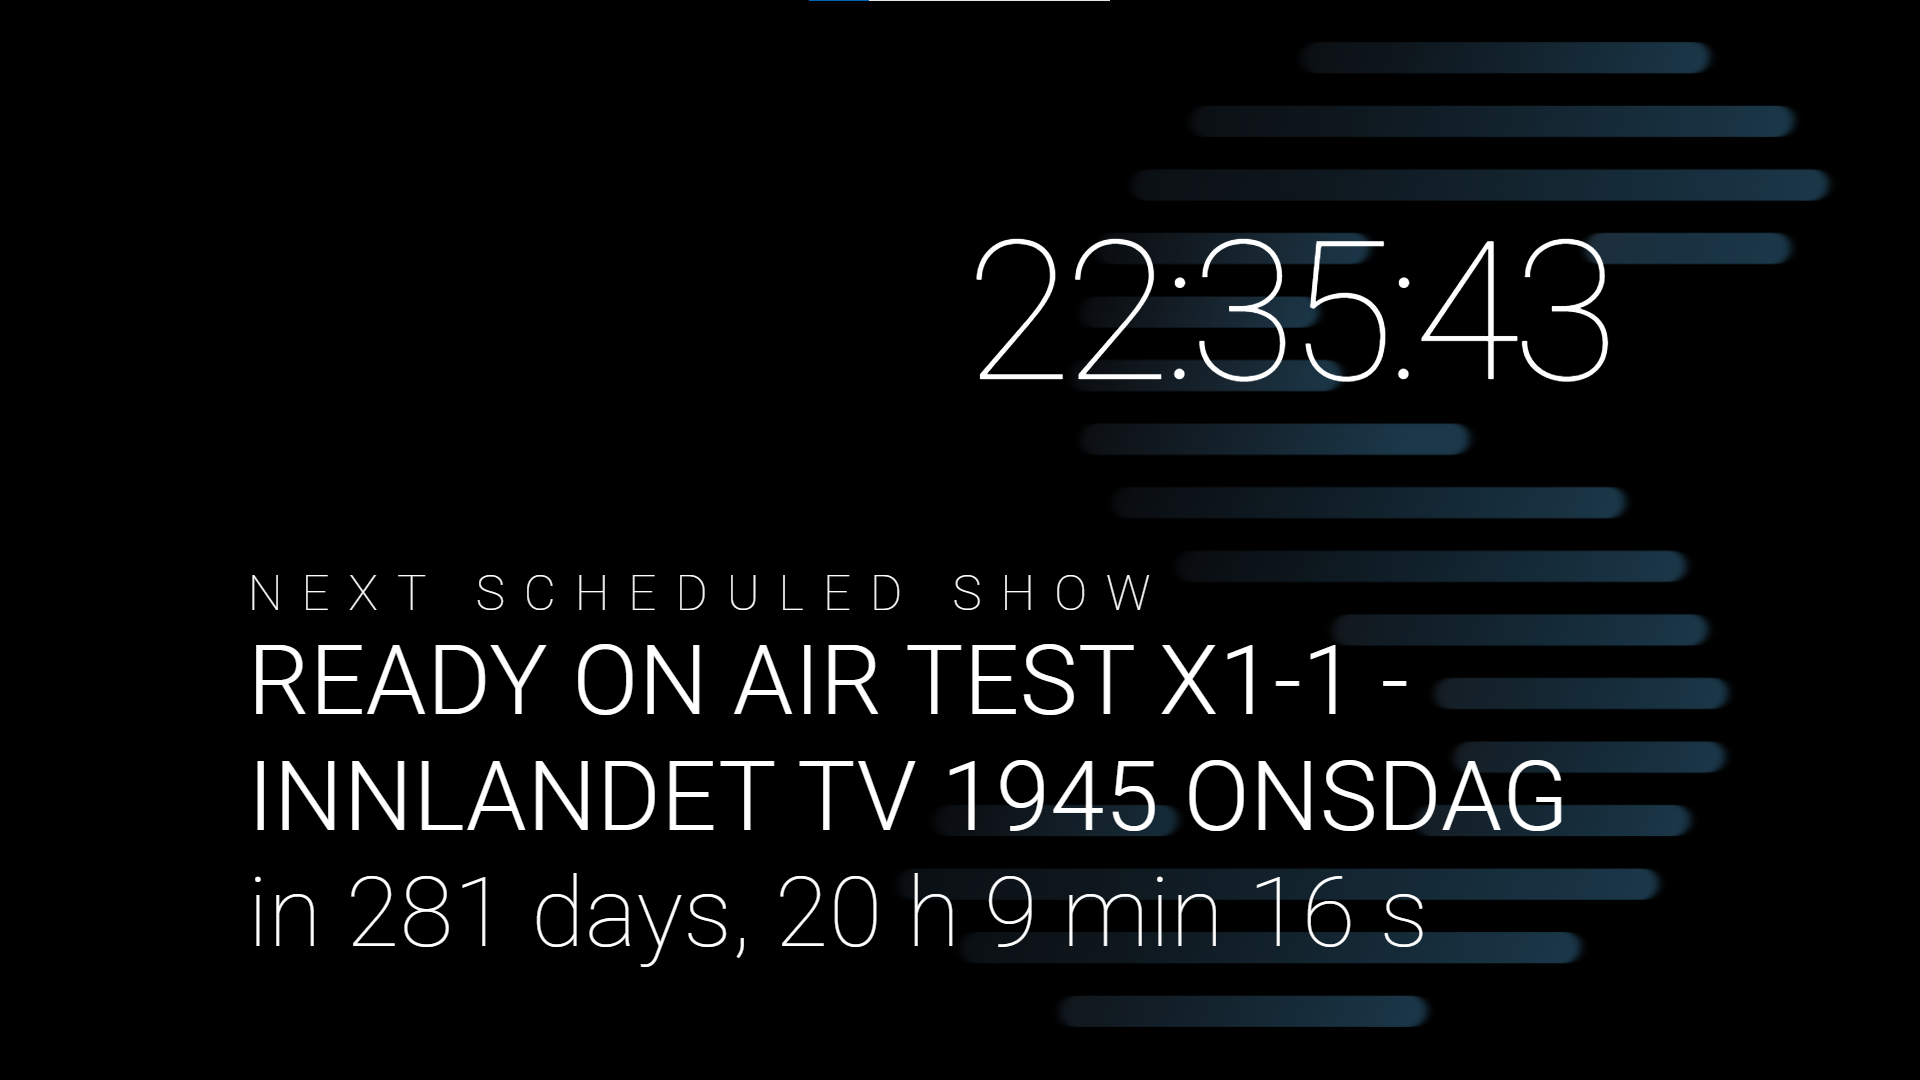 A screensaver showing the next scheduled show